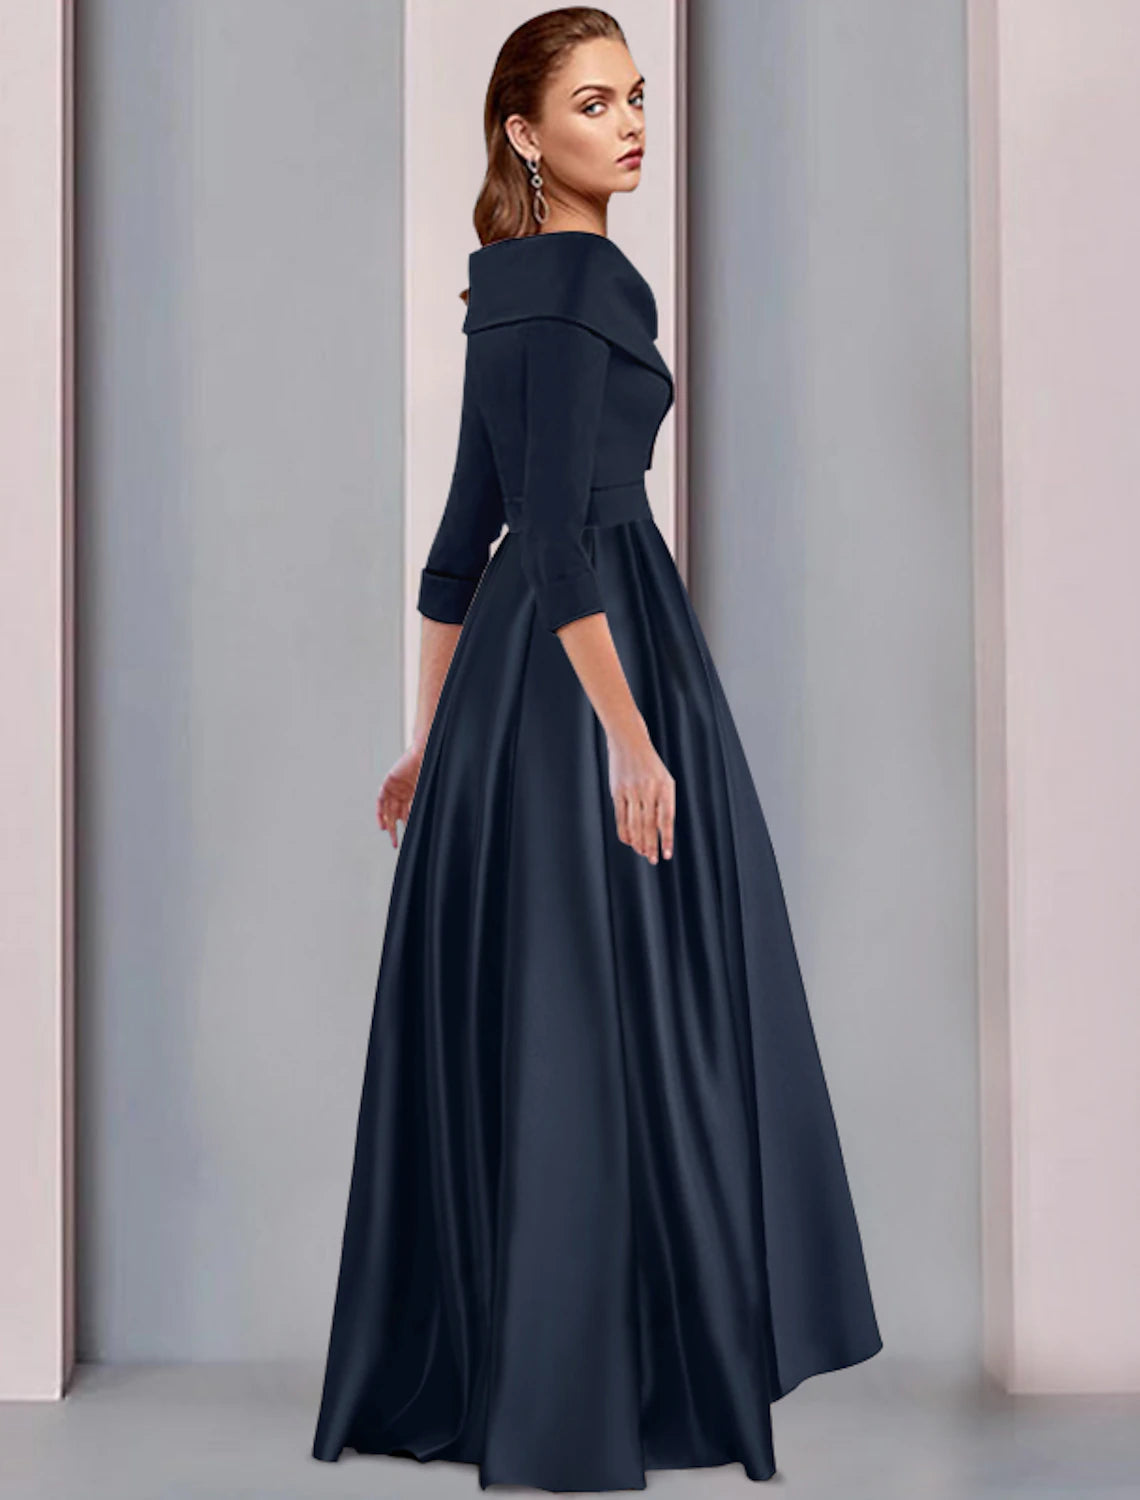 A-Line Mother of the Bride Dress Wedding Guest Elegant High Low Sweet Spaghetti Strap Asymmetrical Tea Length Satin 3/4 Length Sleeve with Pleats